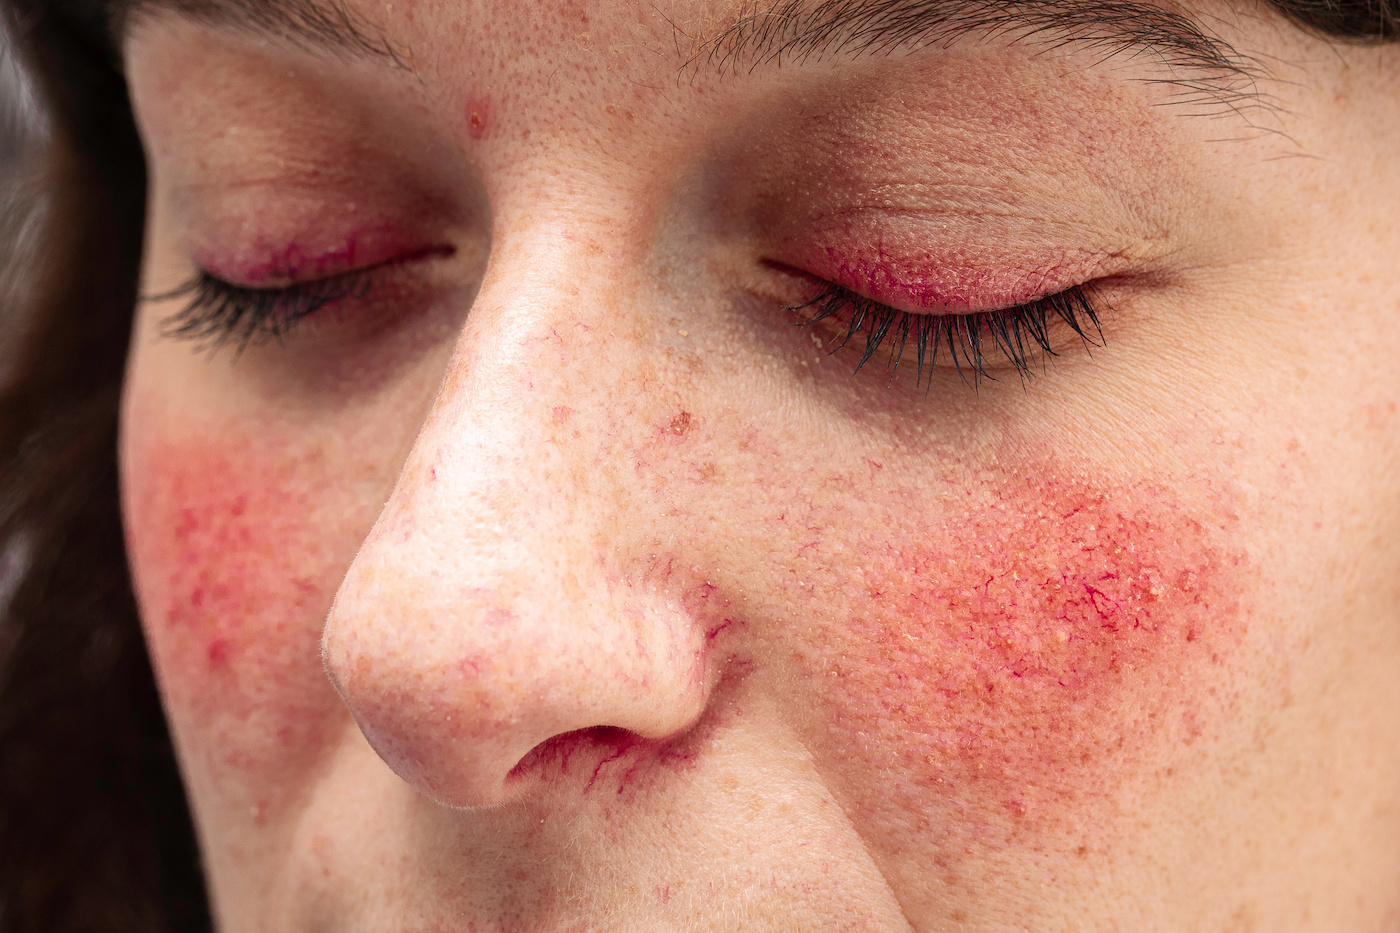 Close-up of a person with redness on their closed eyes and cheeks, looking to treat Ocular Rosacea Type 4. Showing visible signs of redness, inflammation, and small bumps on the skin.